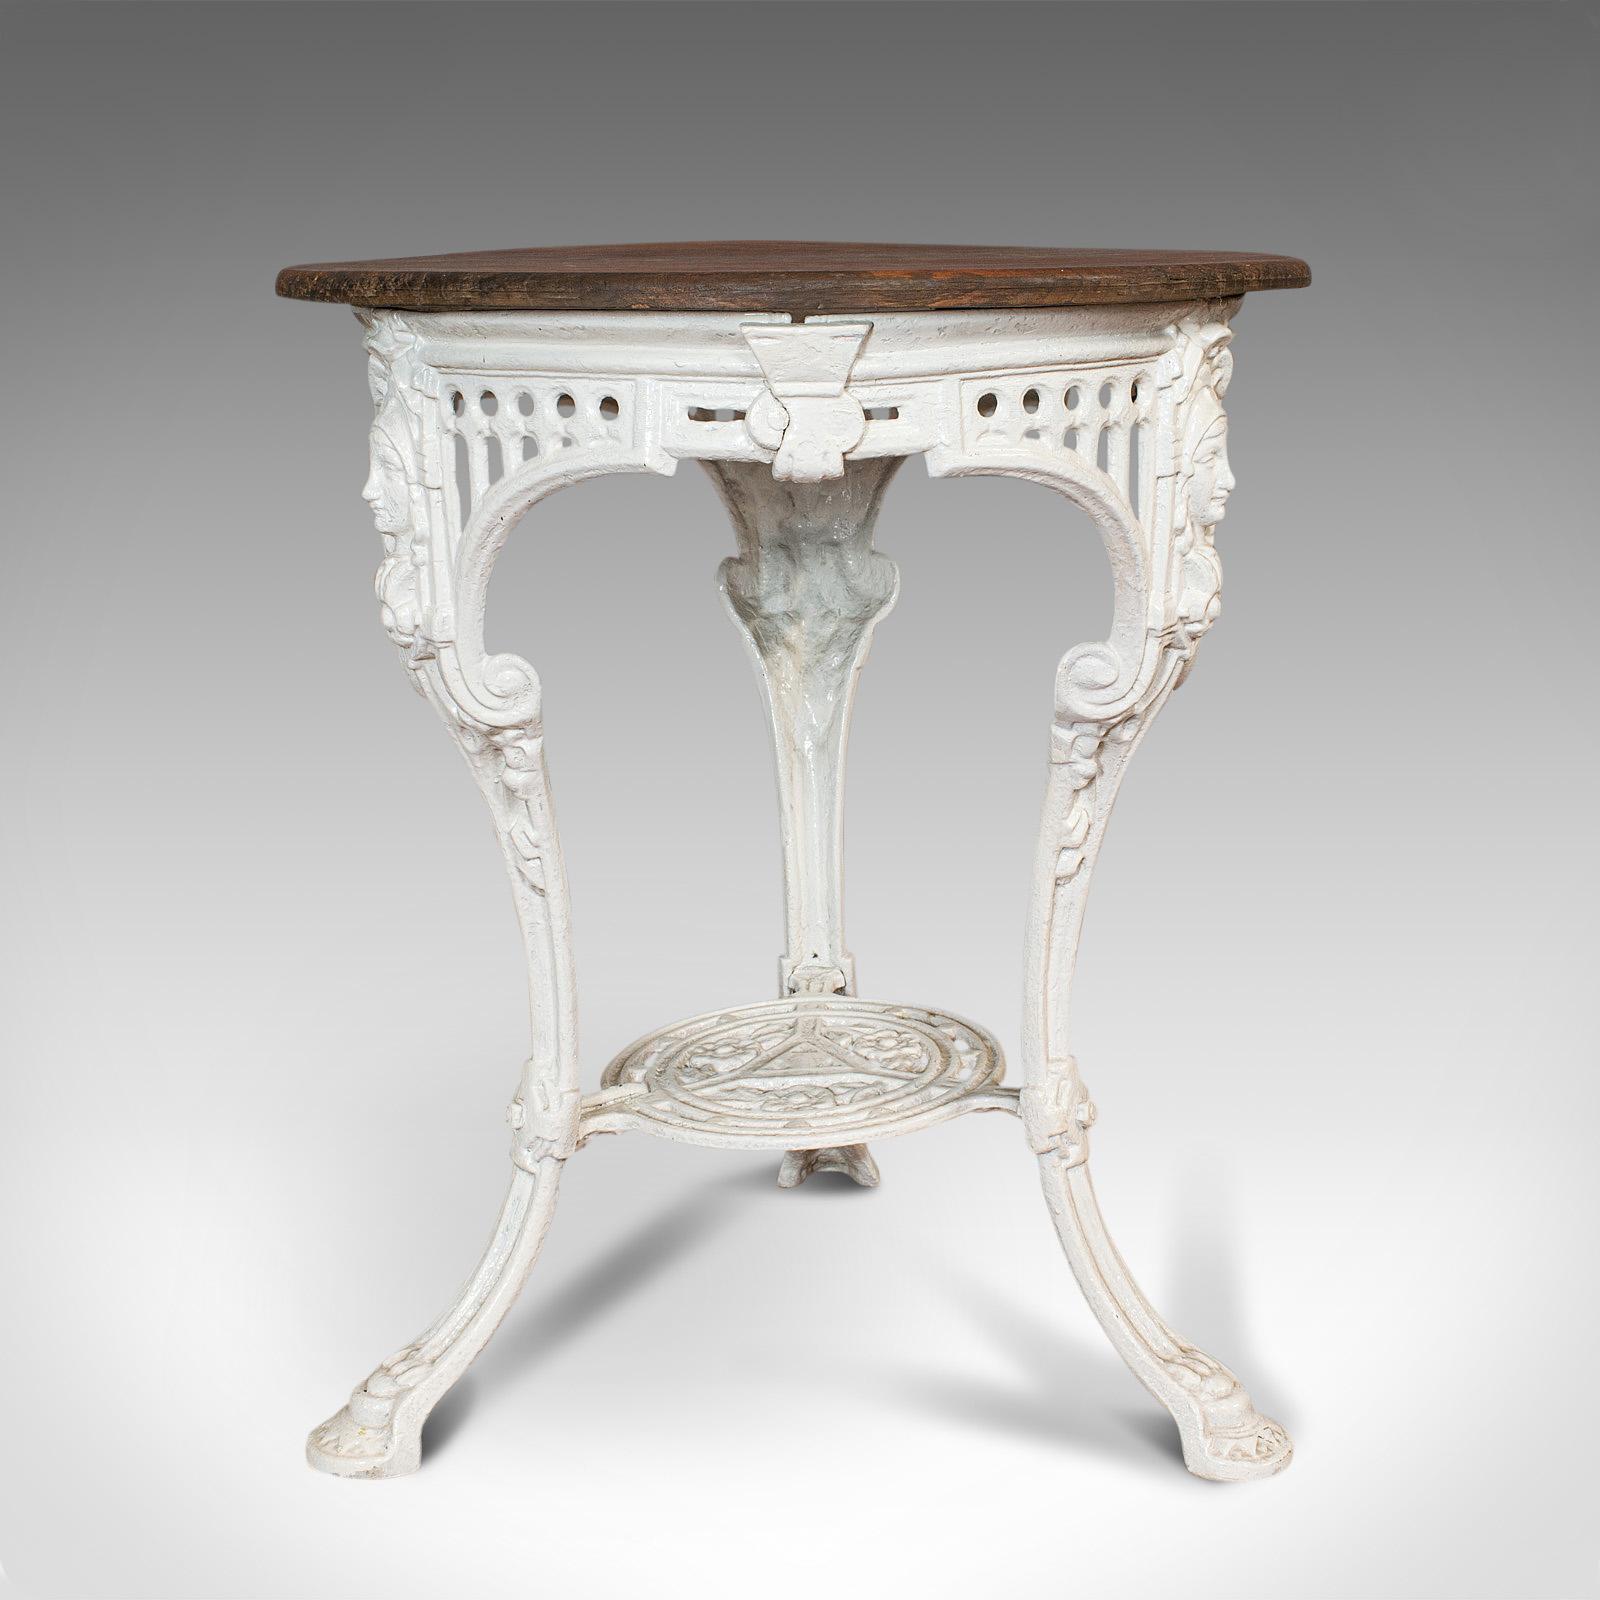 This is an antique Britannia table. An English, cast iron and cedar traditional garden table, dating to the late Victorian period, circa 1900.

Appealing example of a classic table
Displays a desirable aged patina
Cast iron frame in good order